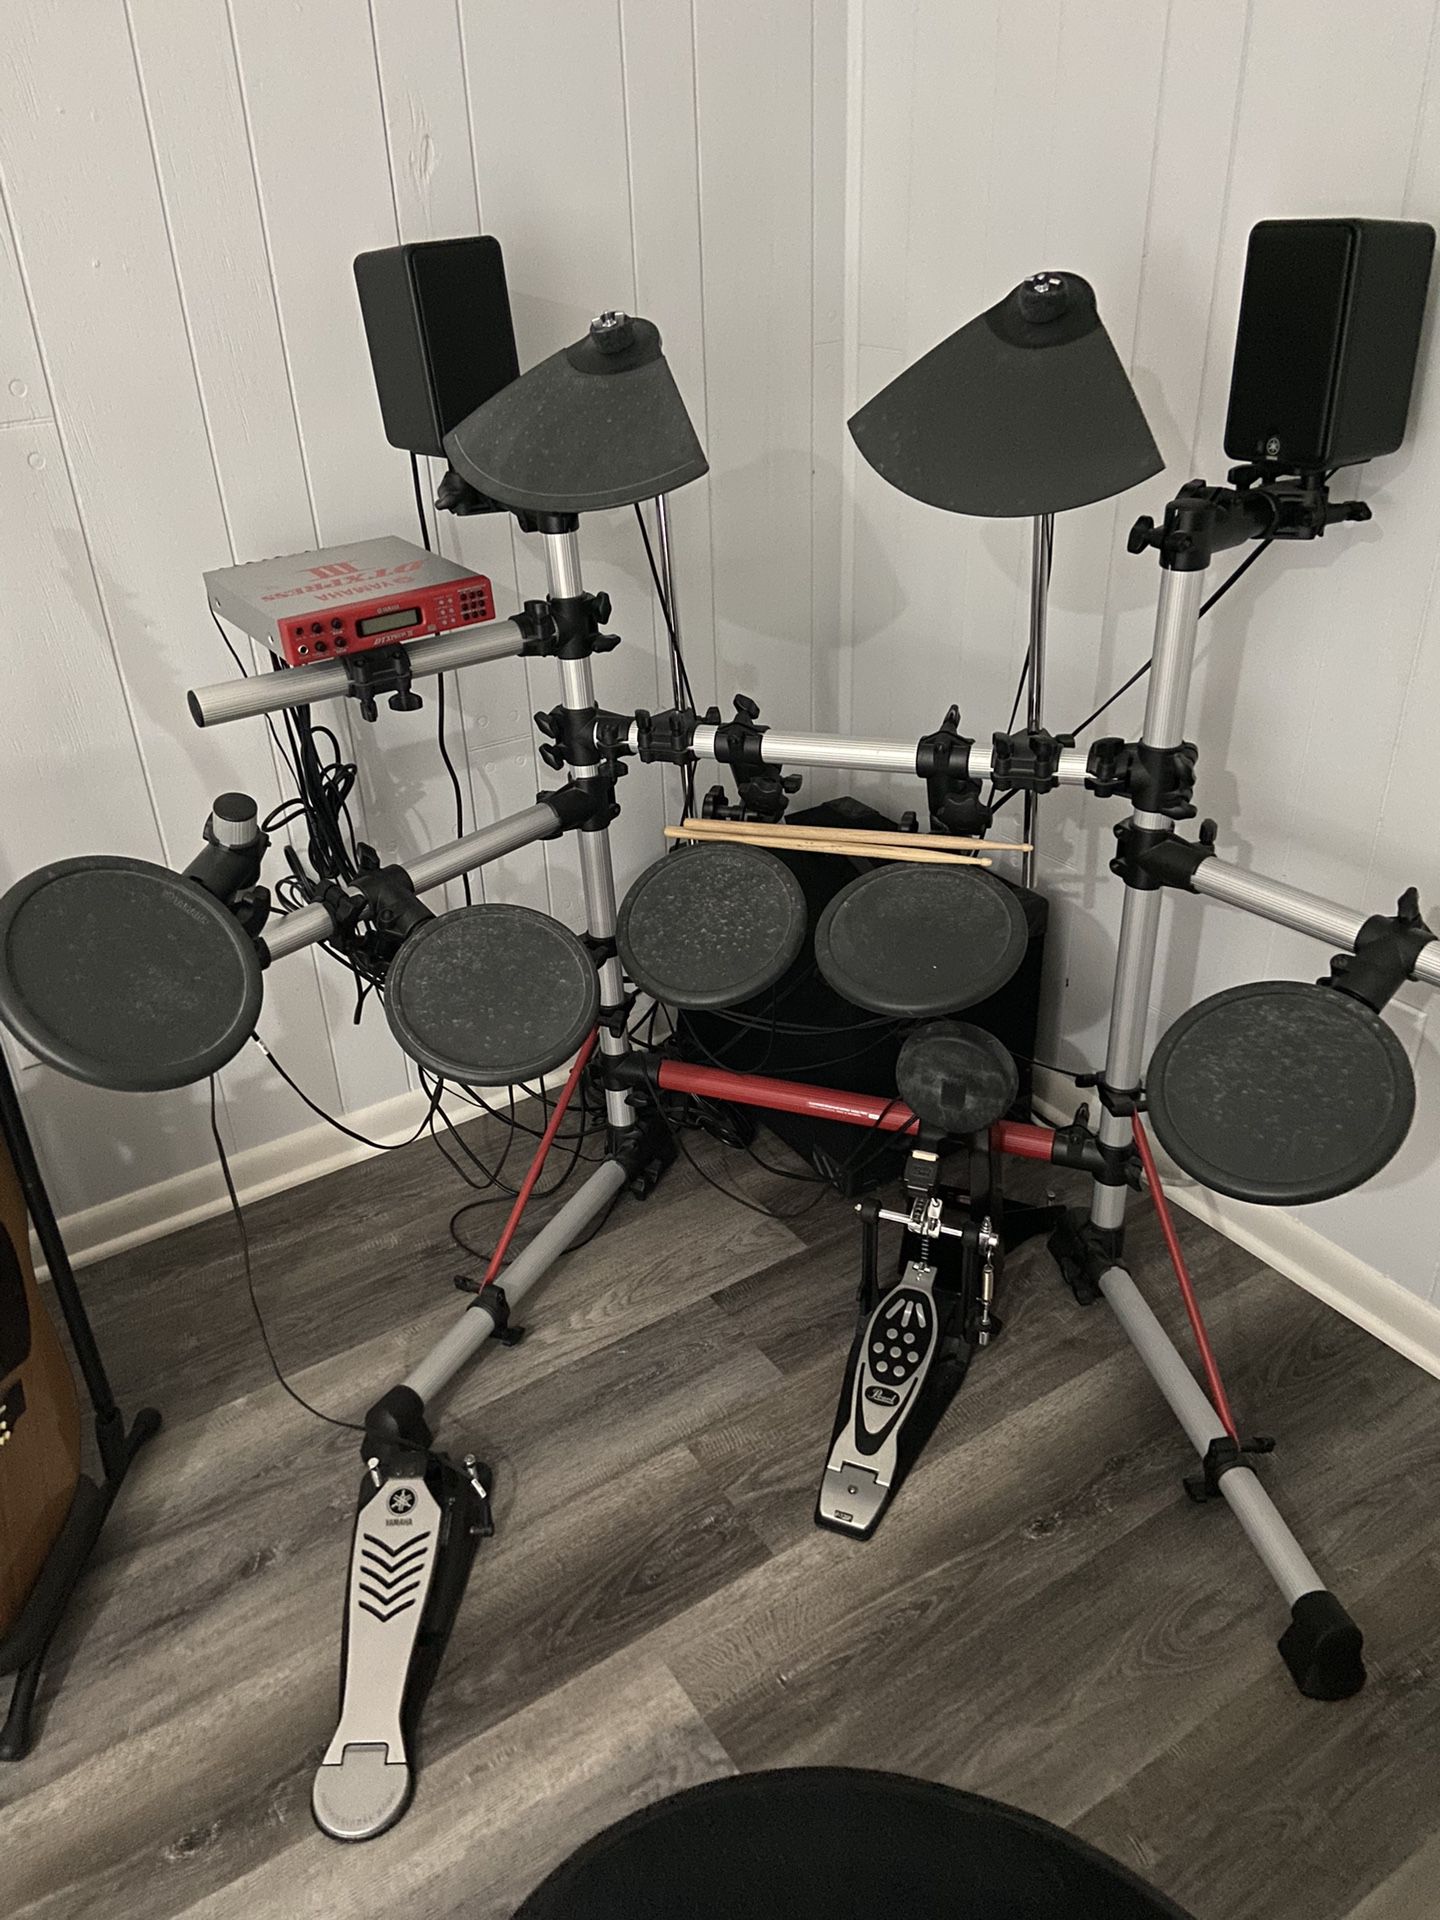 Yamaha DTXpress Electric Drum Set With Speakers And Subwoofer